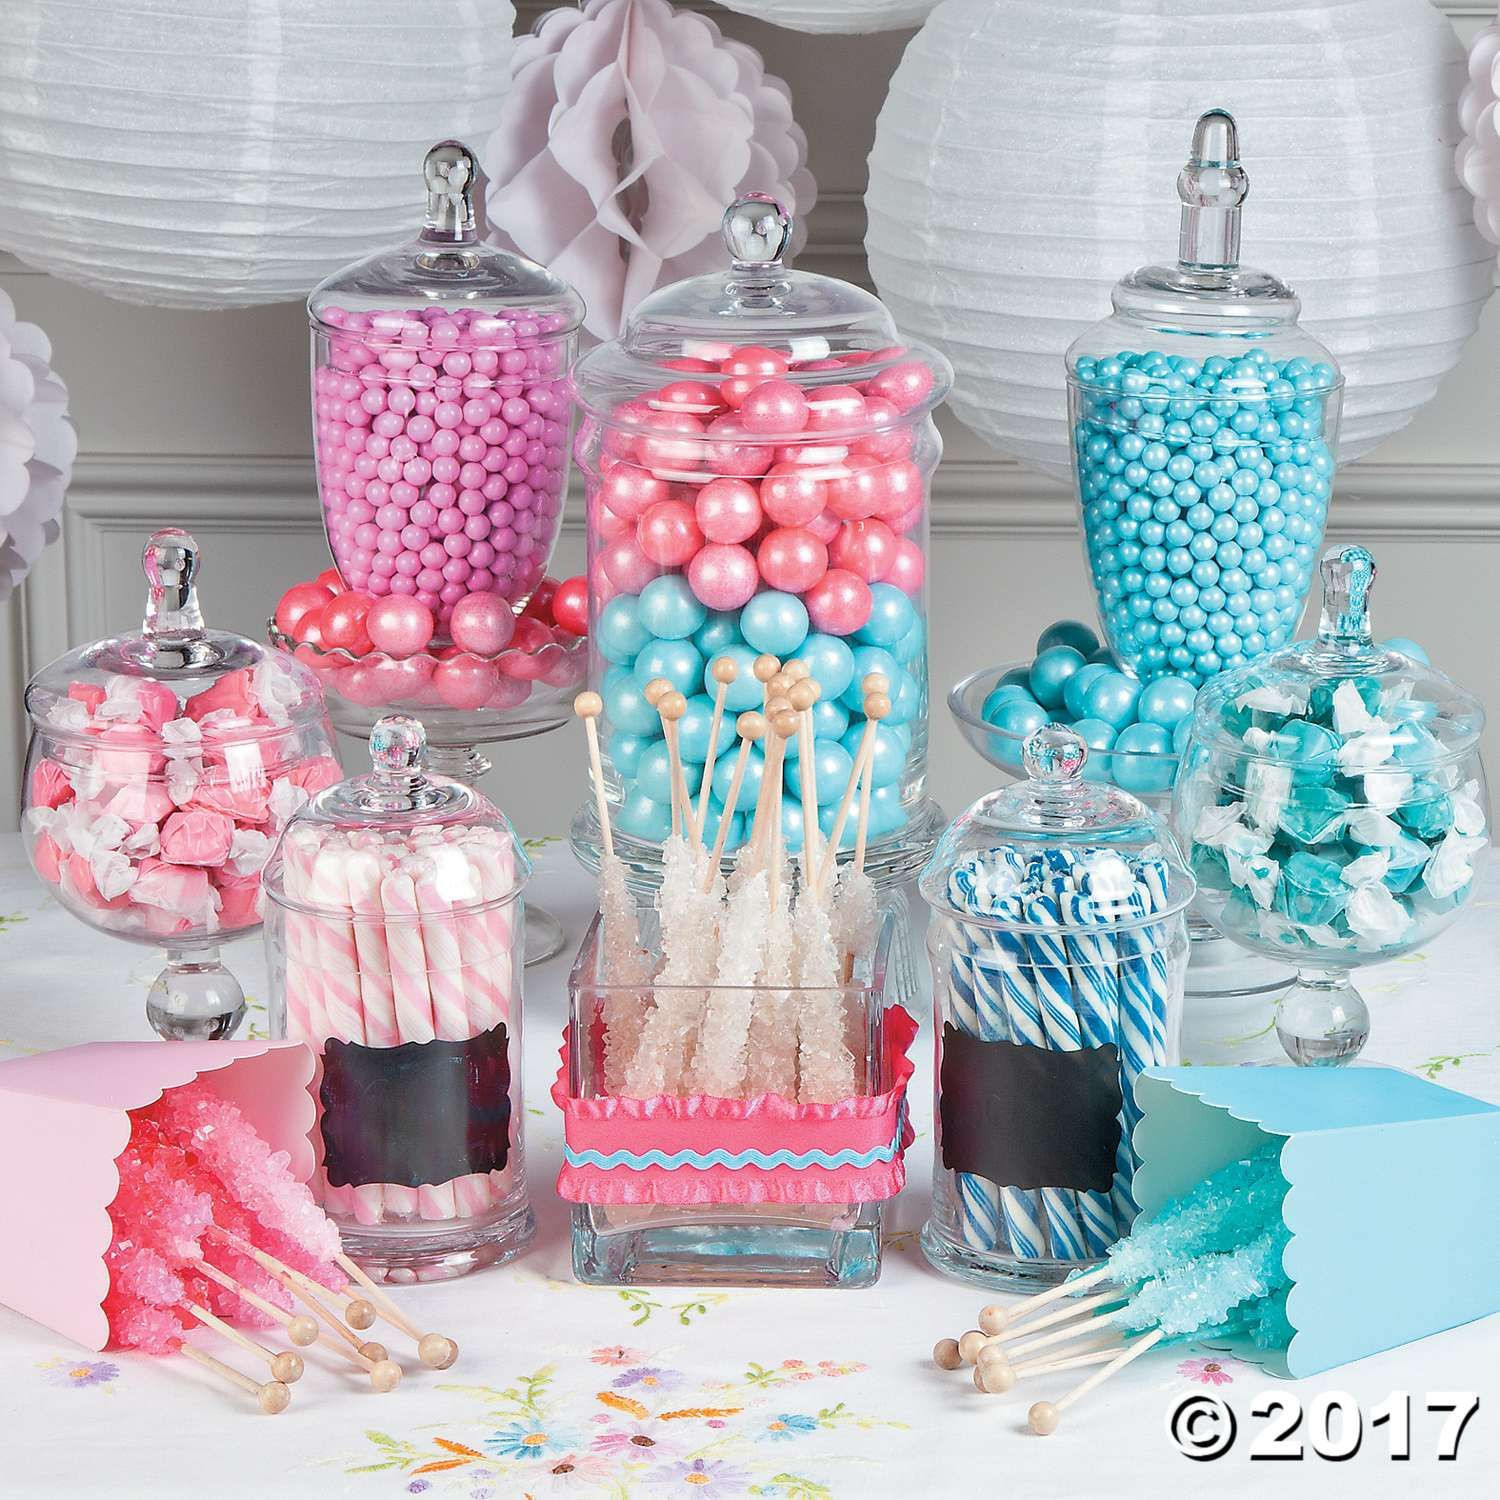 Good Ideas For A Gender Reveal Party
 Gender Reveal Candy Buffet Idea